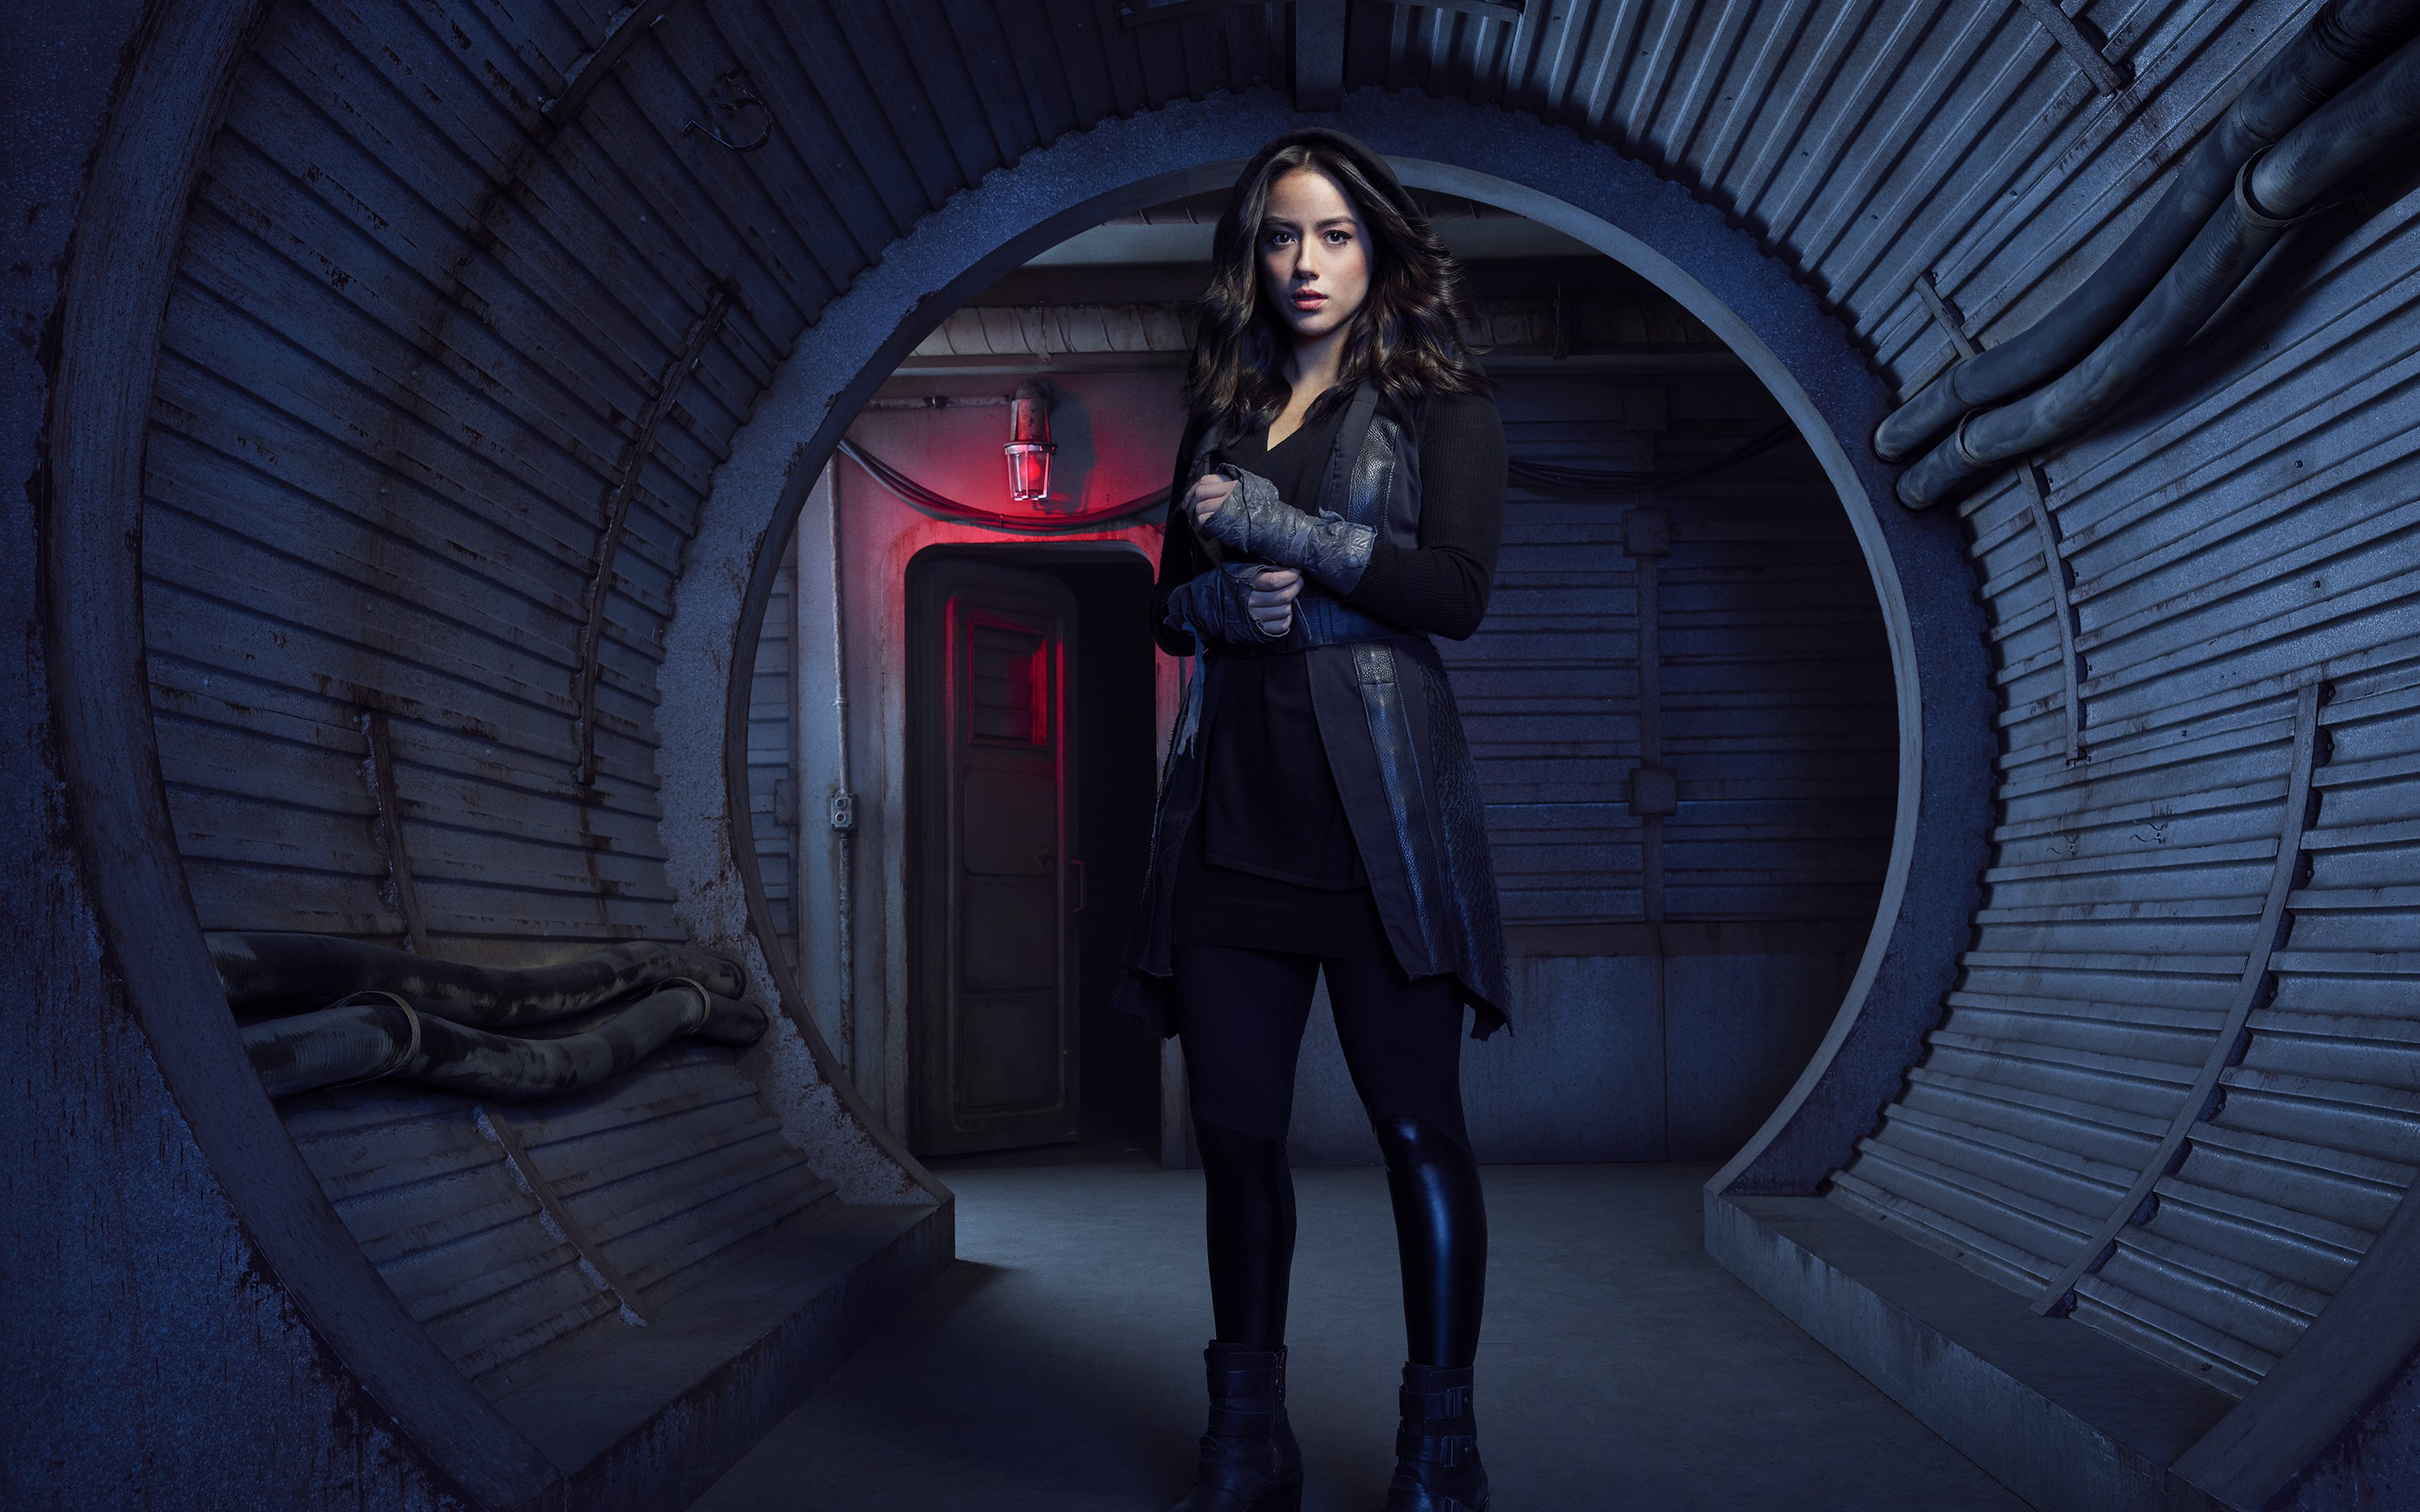 2560x1080 Chloe Bennet As Daisy Johnson Agents Of Shield Season 5 2560x1080 Resolution Wallpaper Hd Tv Series 4k Wallpapers Images Photos And Background Wallpapers Den